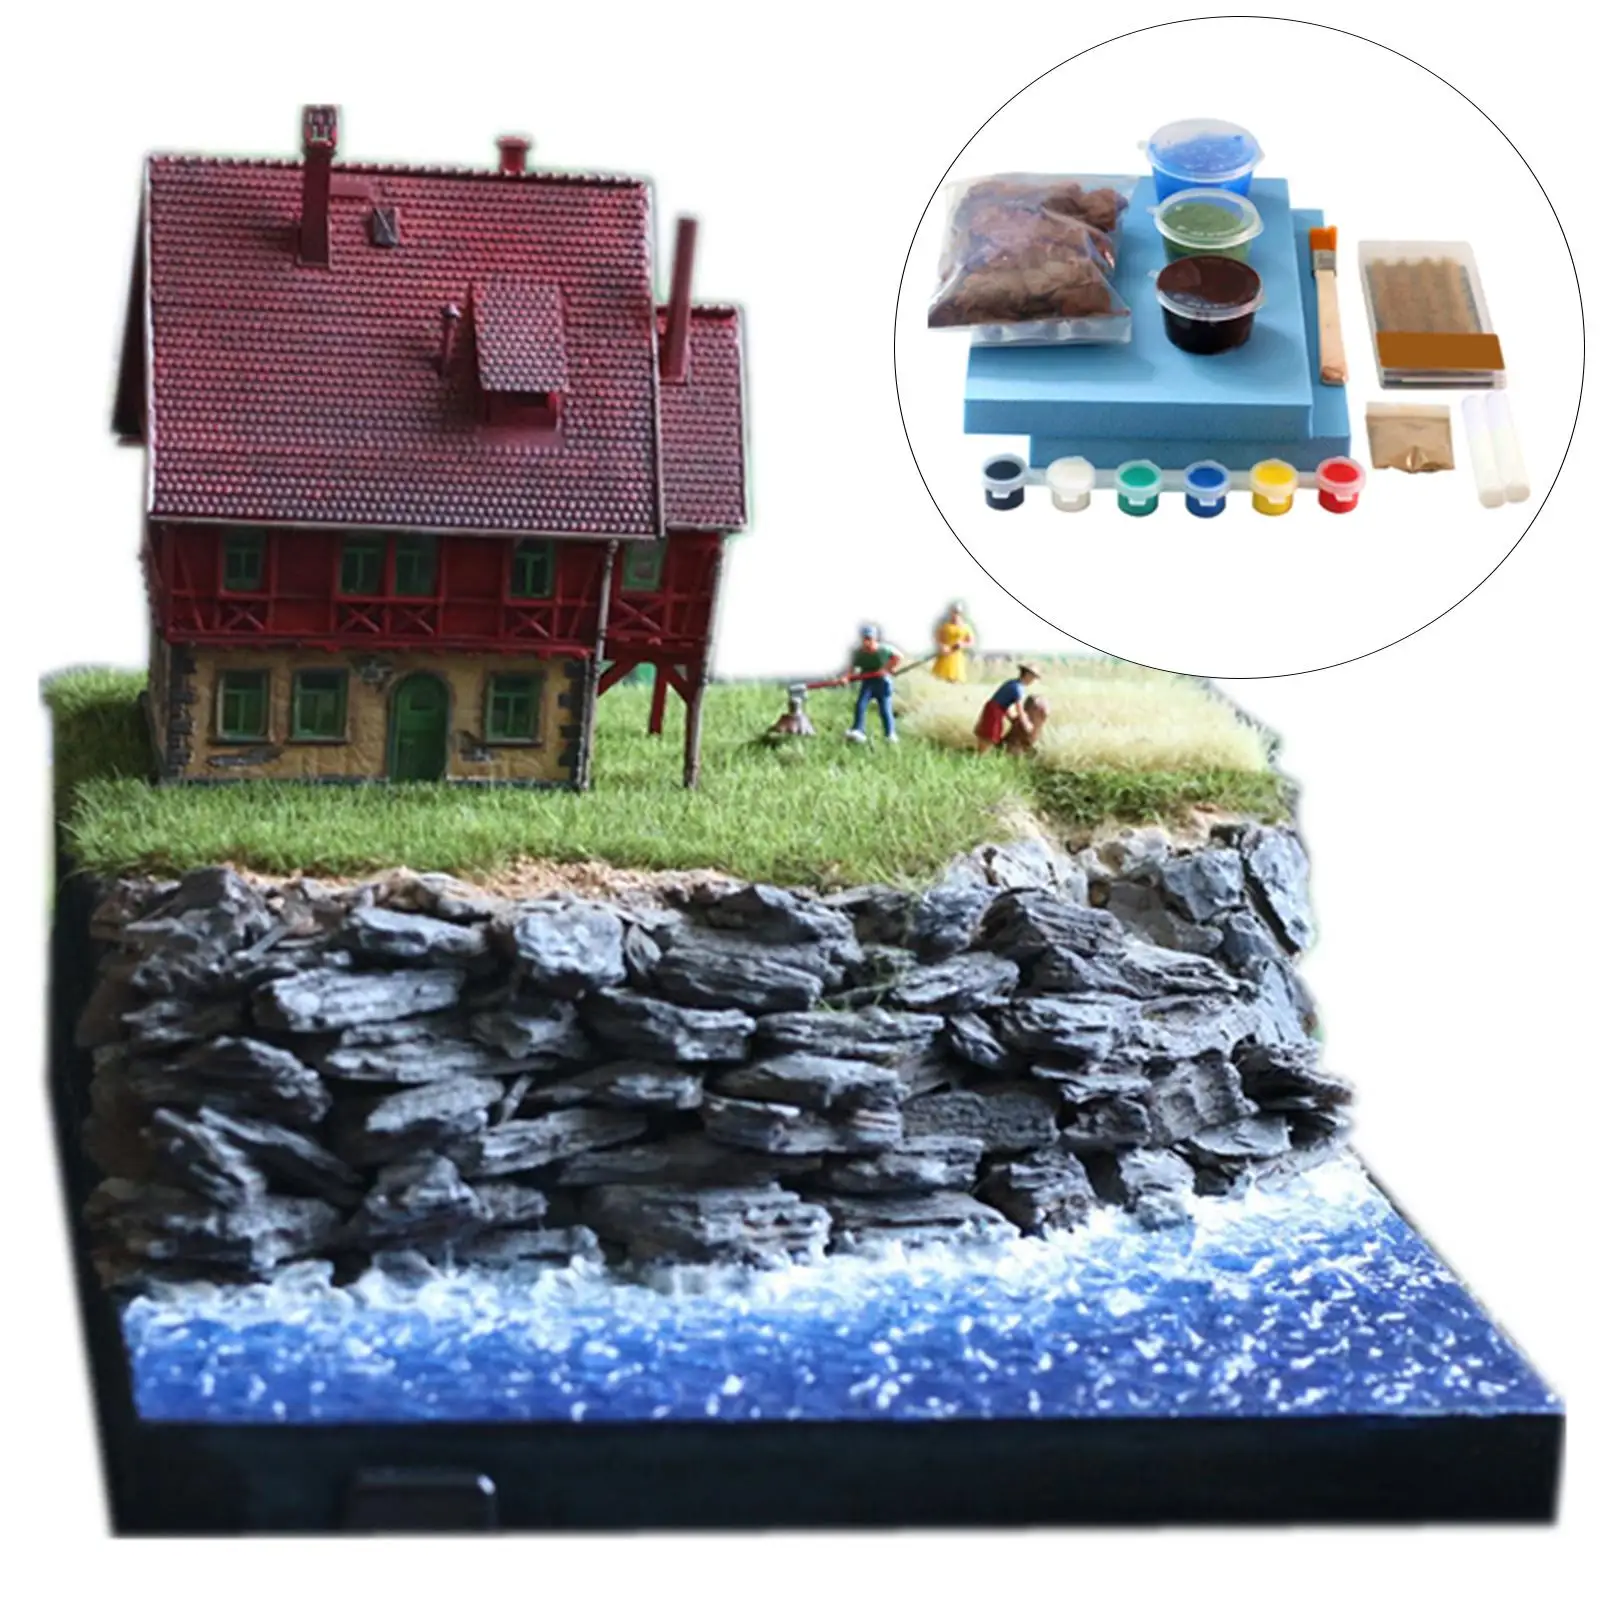 DIY Railway Scenery Kits Crafts Building Material for Architecture Model